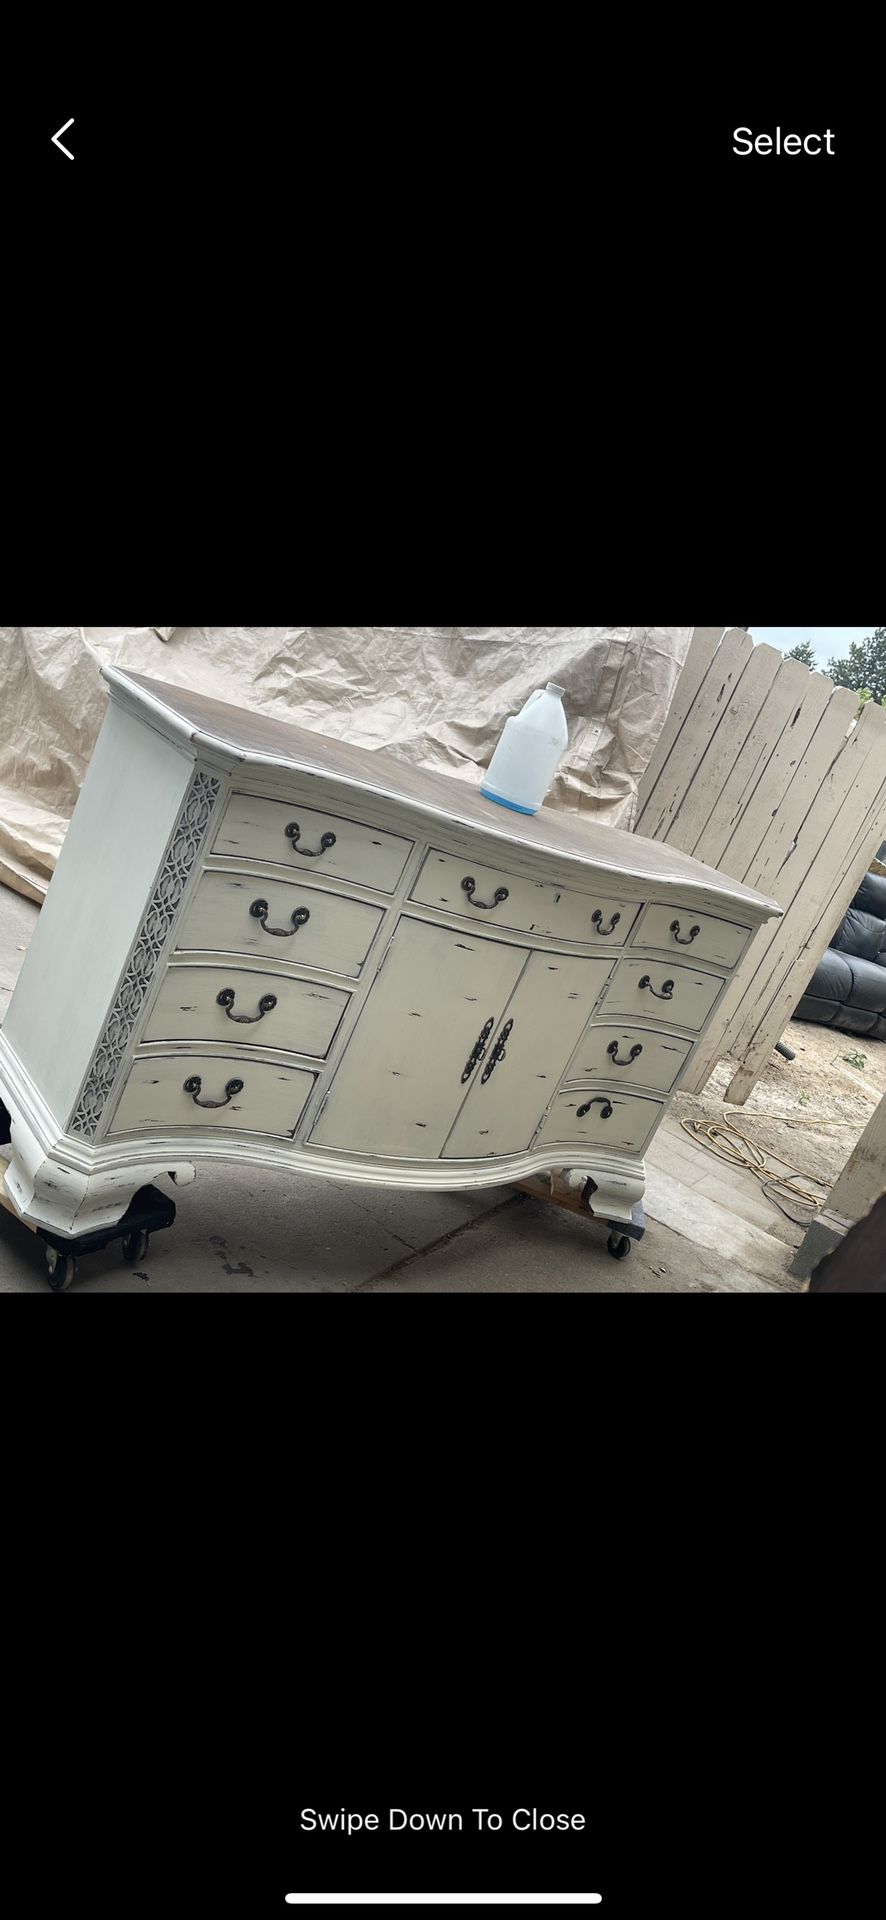 Beautiful Large Dresser With Mirror Chalk painted And Distressed 